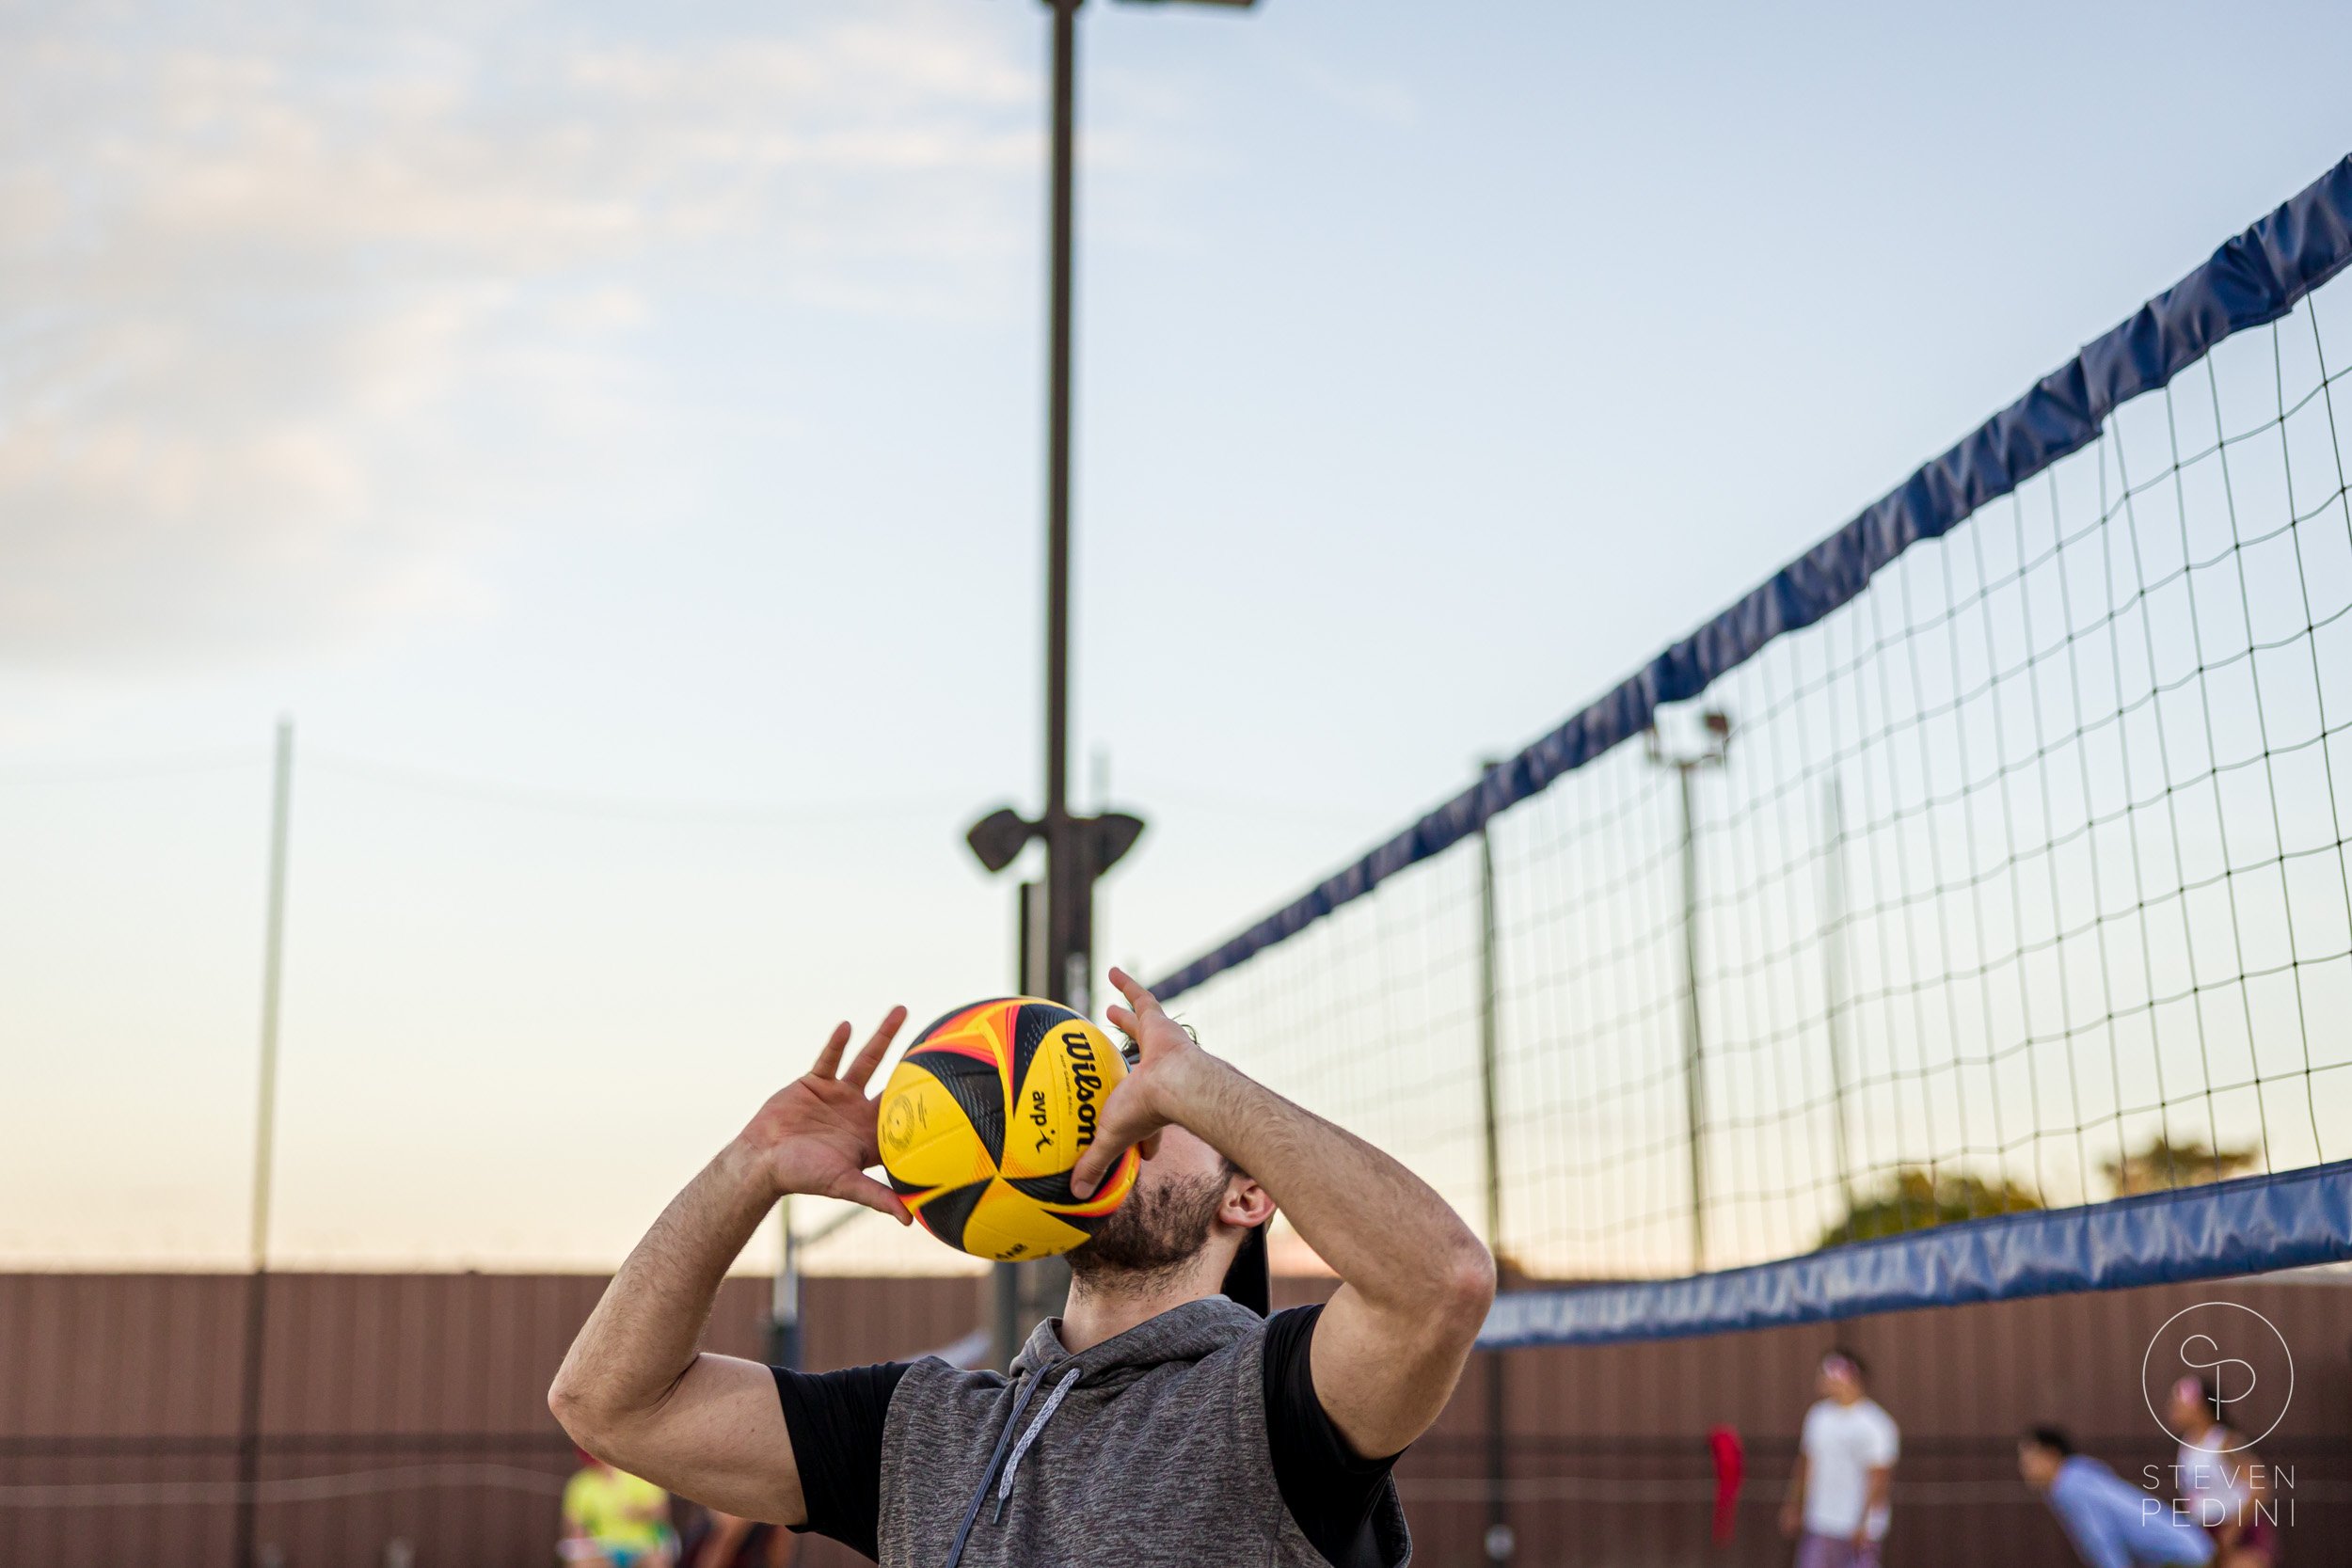 Steven Pedini Photography - Bumpy Pickle - Sand Volleyball - Houston TX - World Cup of Volleyball - 00228.jpg